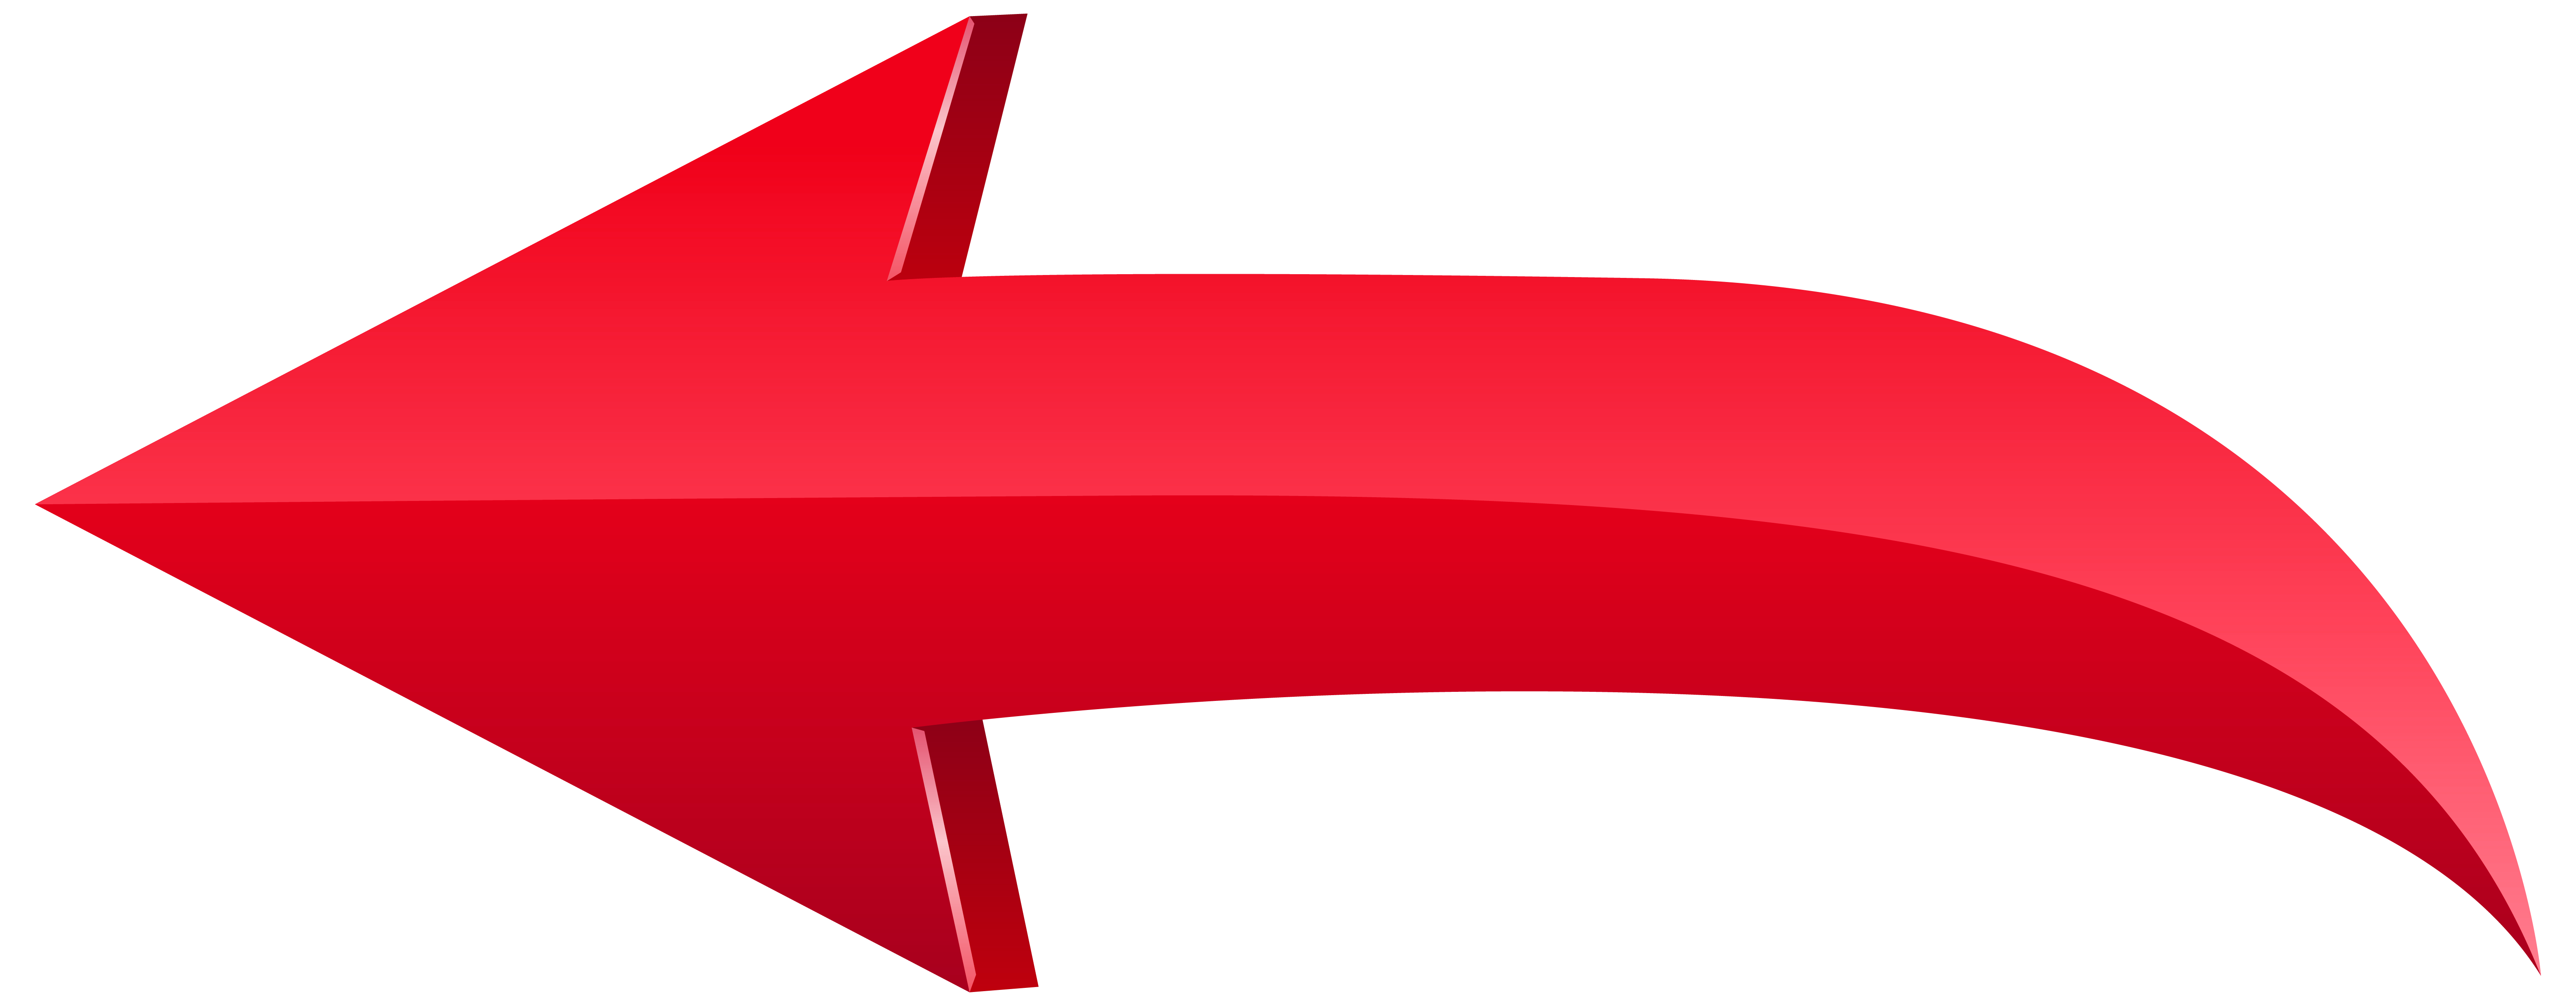 Download Arrow Png Picture HQ PNG Image FreePNGImg